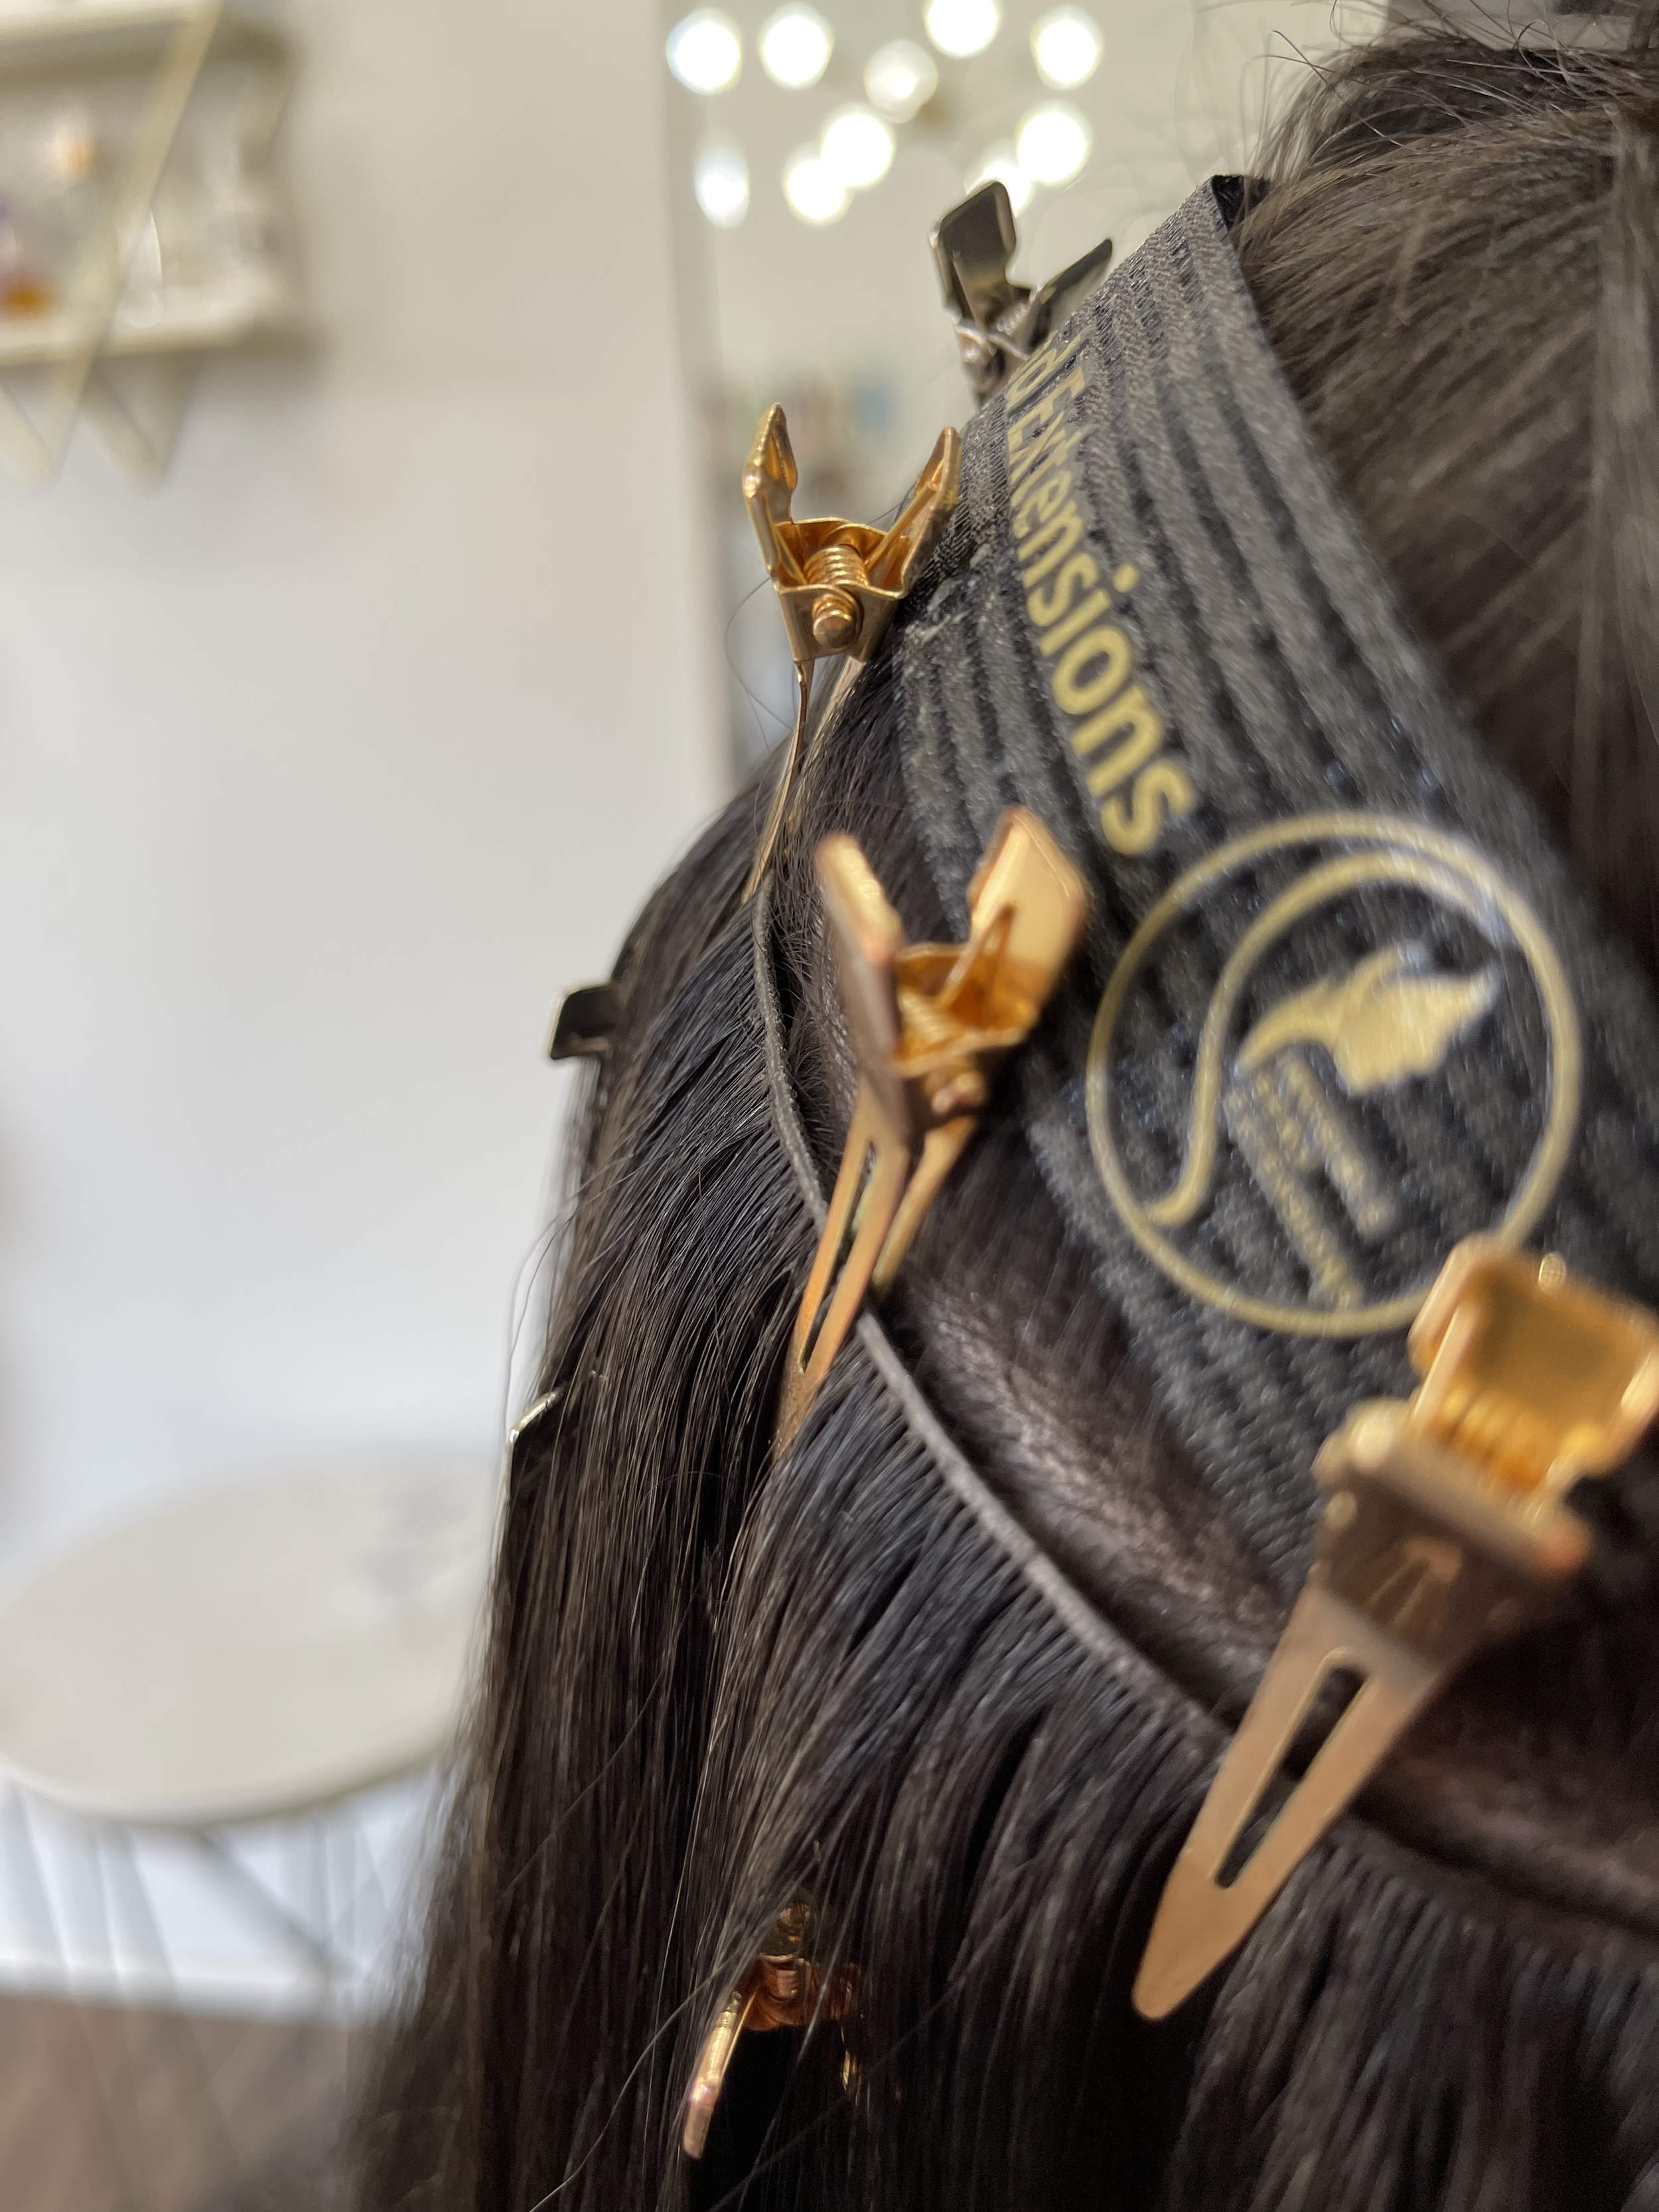 Clip-In Hair Installation Guide — Bohyme®